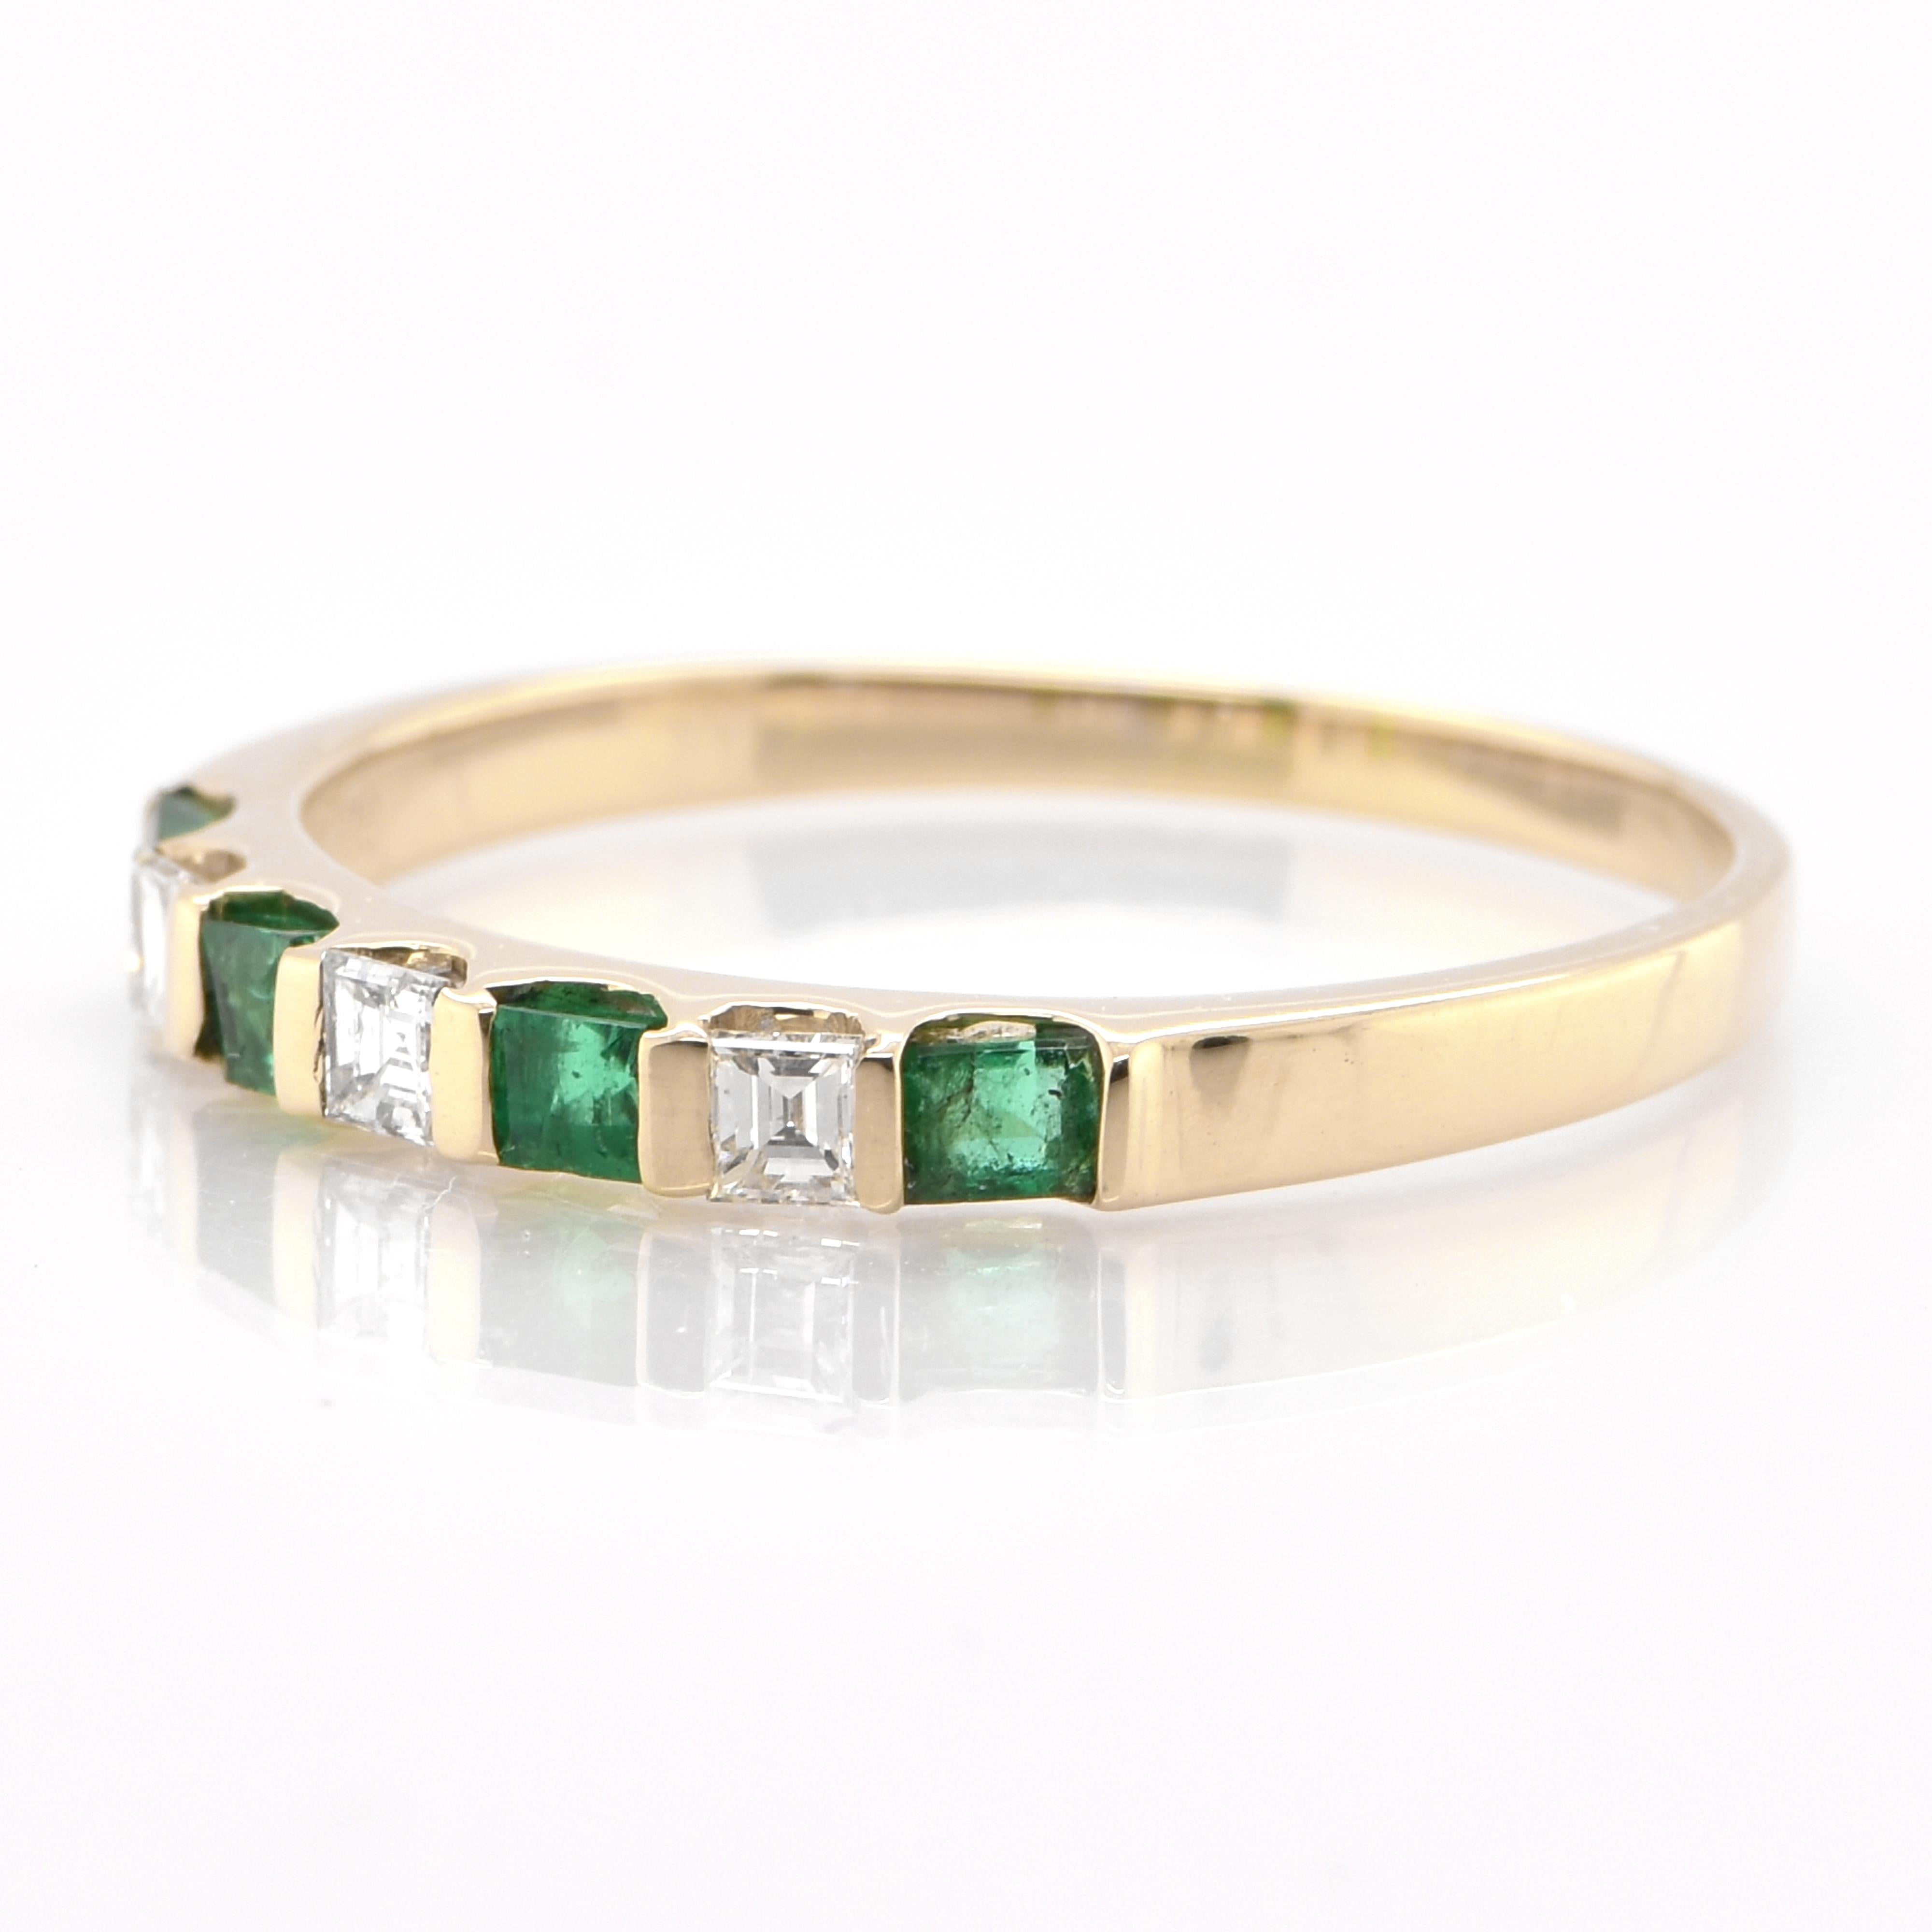 Modern Natural Ruby, Sapphire and Emerald Stackable Rings Set in 18 Karat Yellow Gold